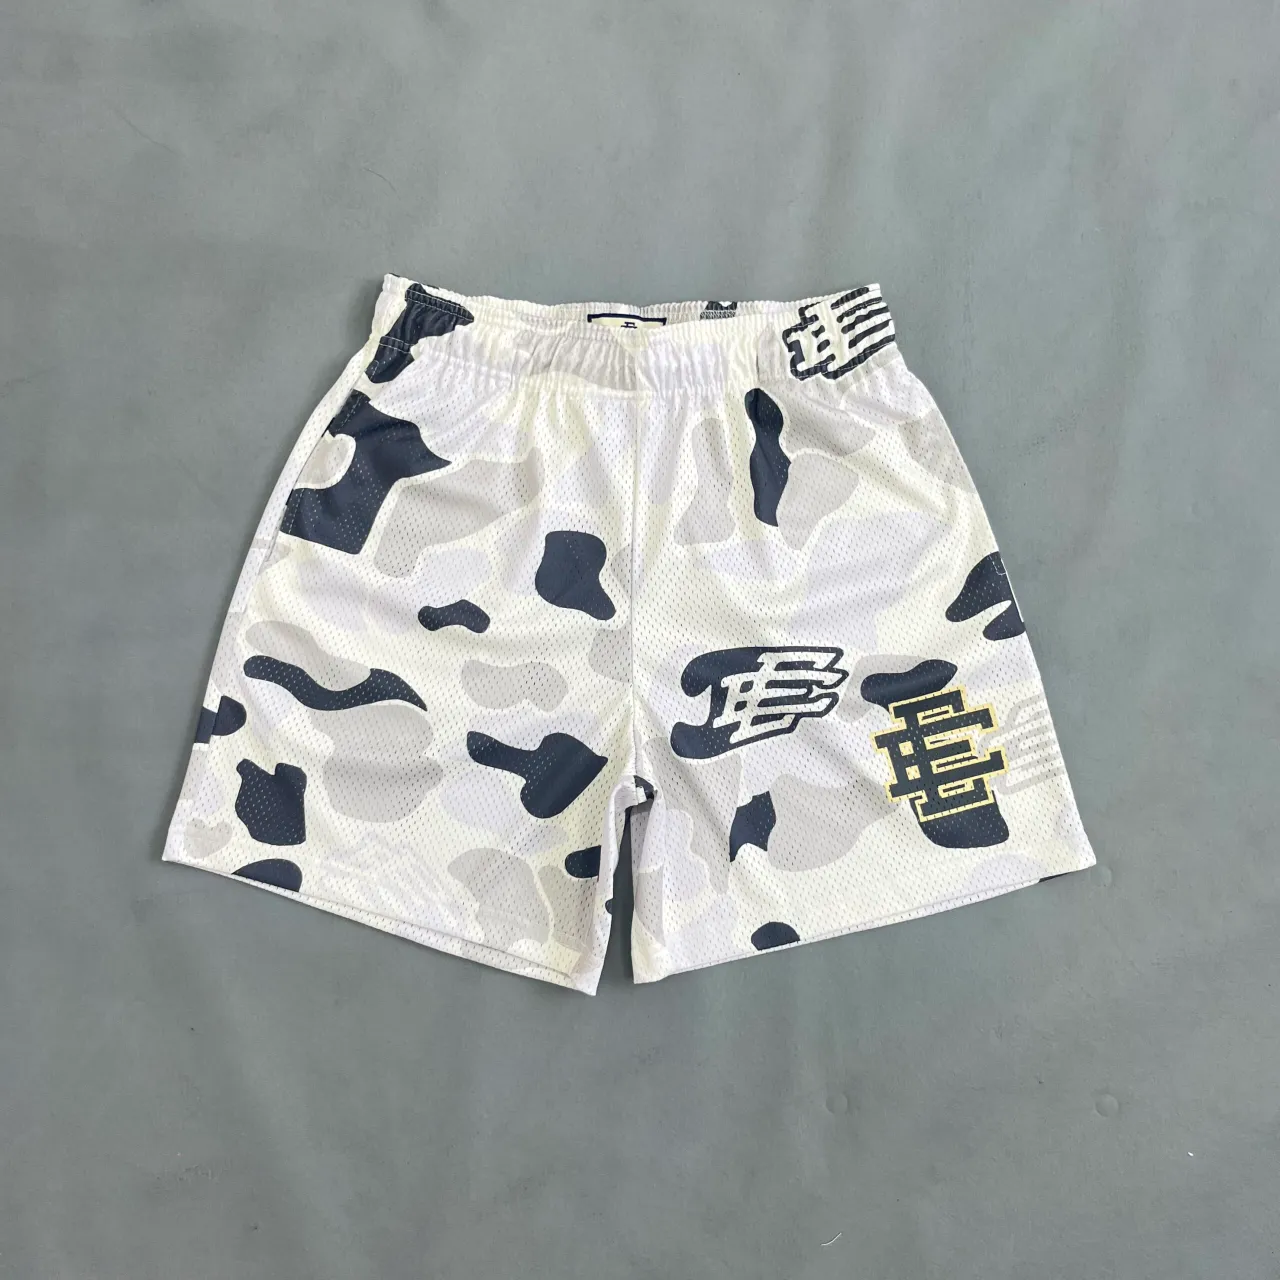 Eric EE Shorts Clothing from Official Eric Store. Fast Delivery Worldwide.